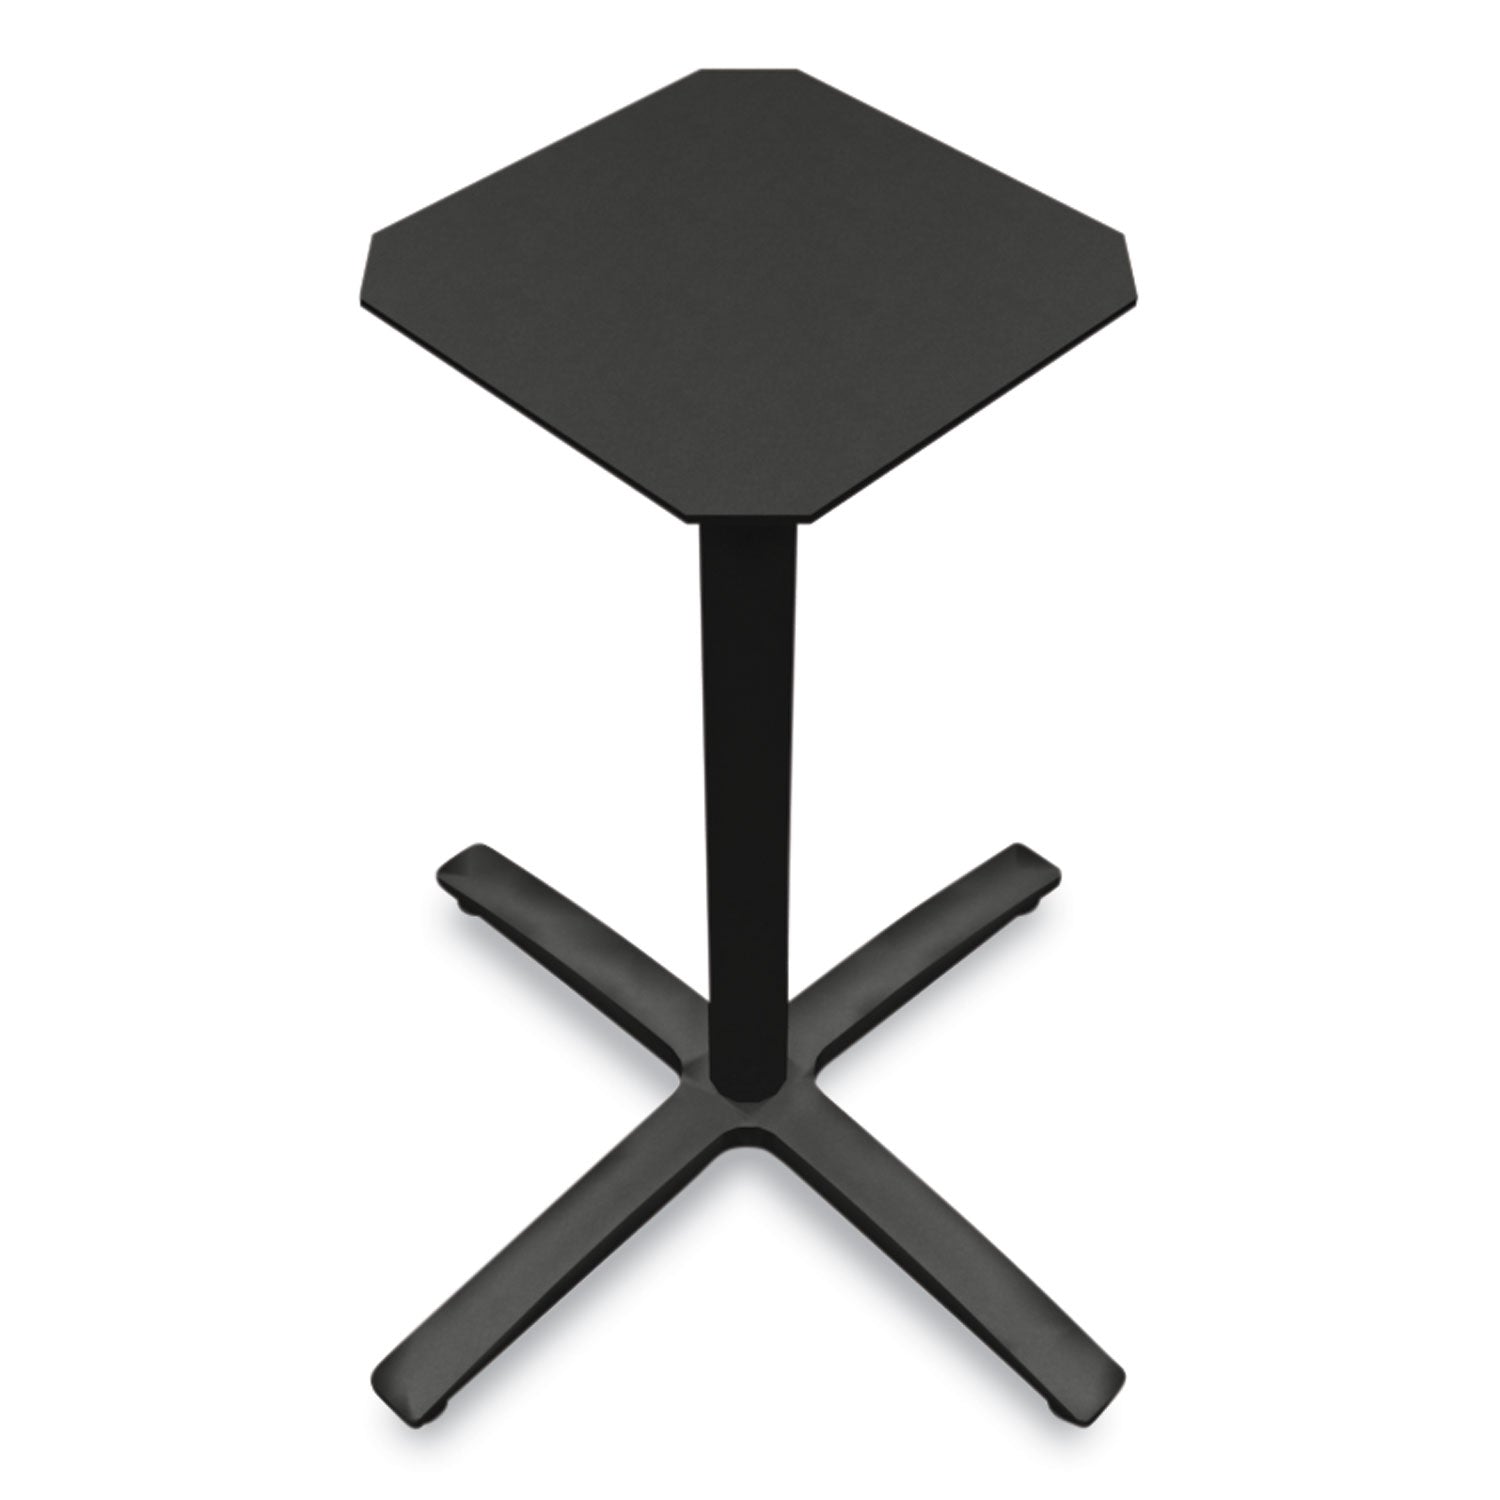 between-seated-height-x-base-for-30-to-36-table-tops-2618w-x-2957h-black_honbtx30scbk - 3